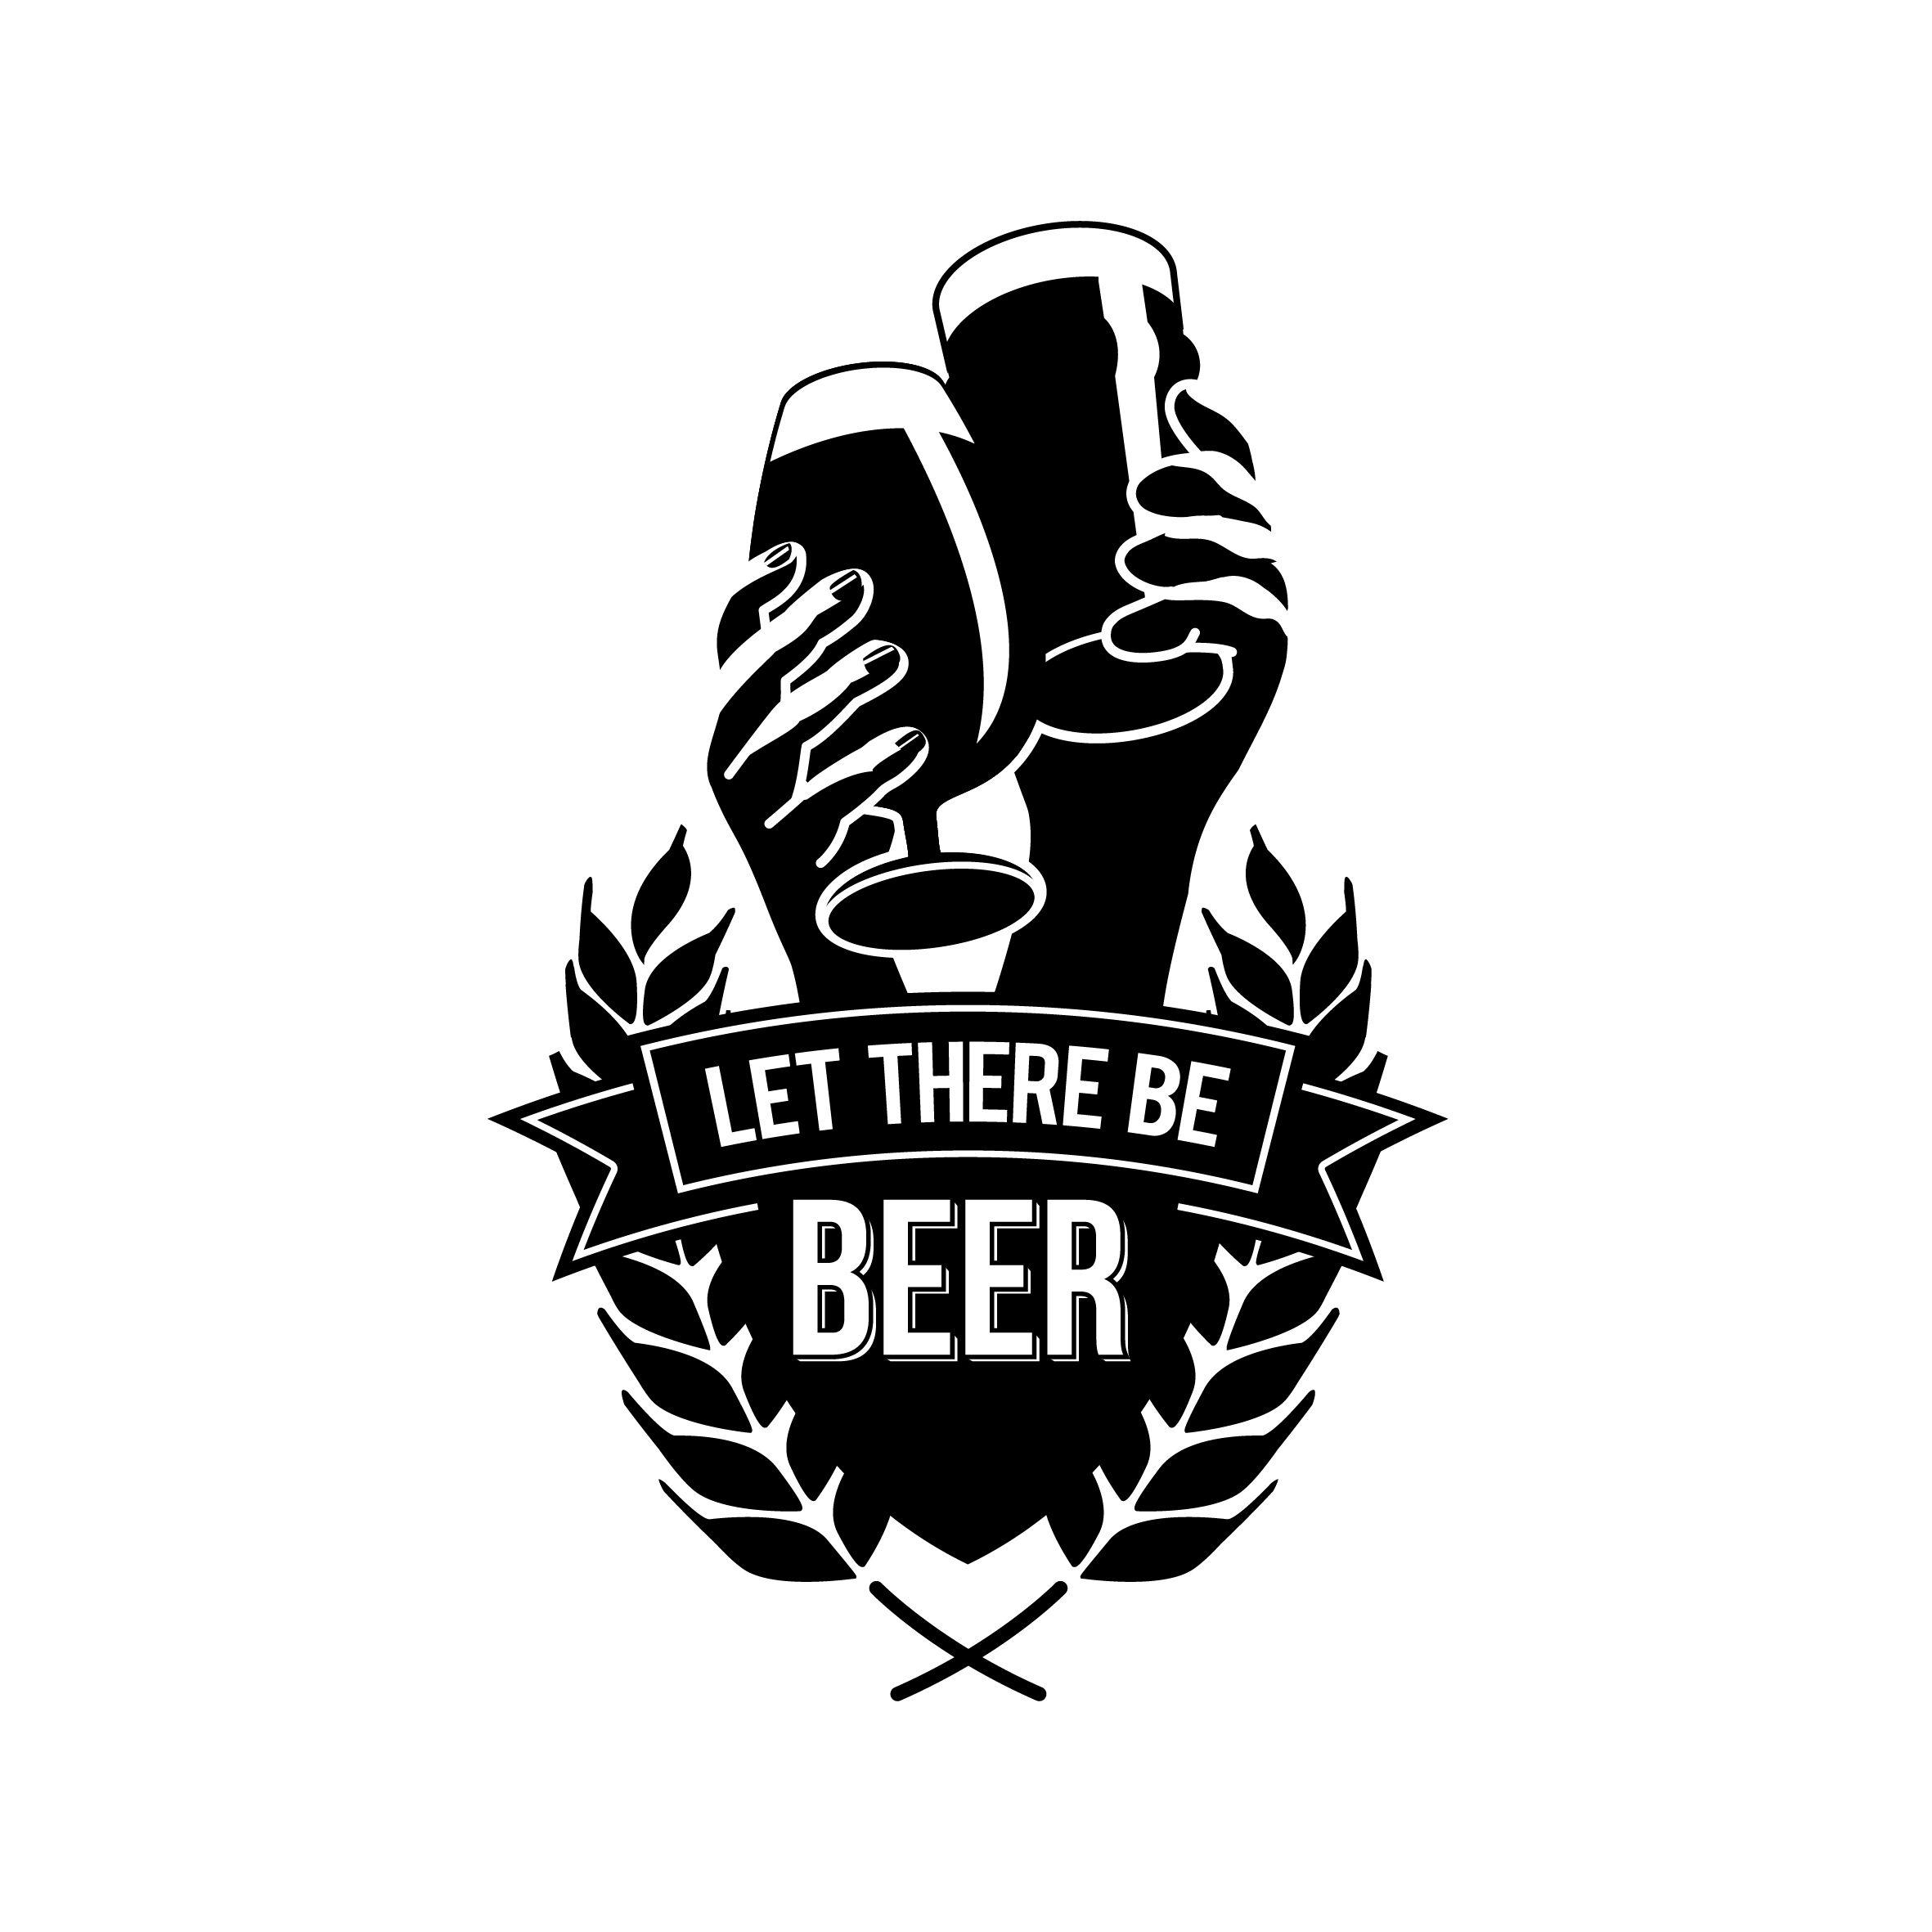 Beer Can Logo - Let There Be Beer Tim Lovejoy